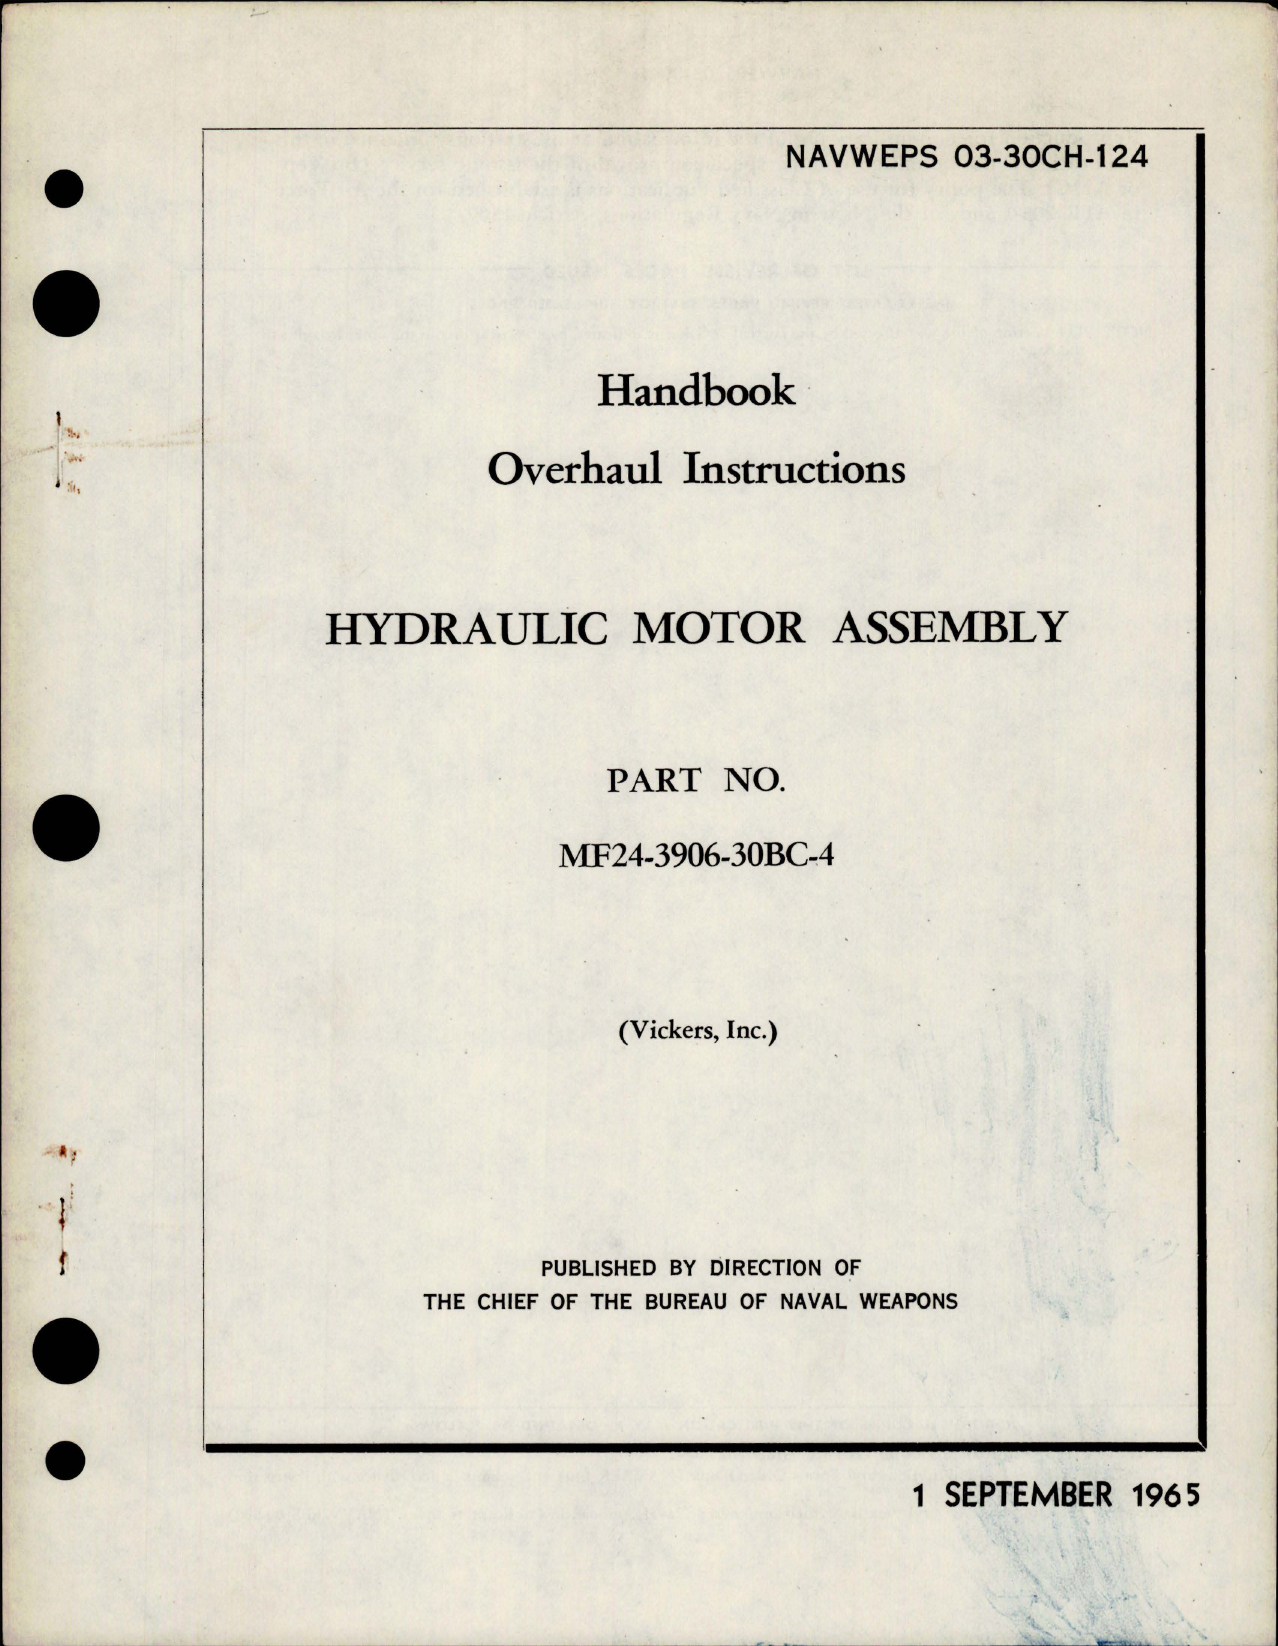 Sample page 1 from AirCorps Library document: Overhaul Instructions for Hydraulic Motor Assembly - Part MF24-3906-30BC-4 